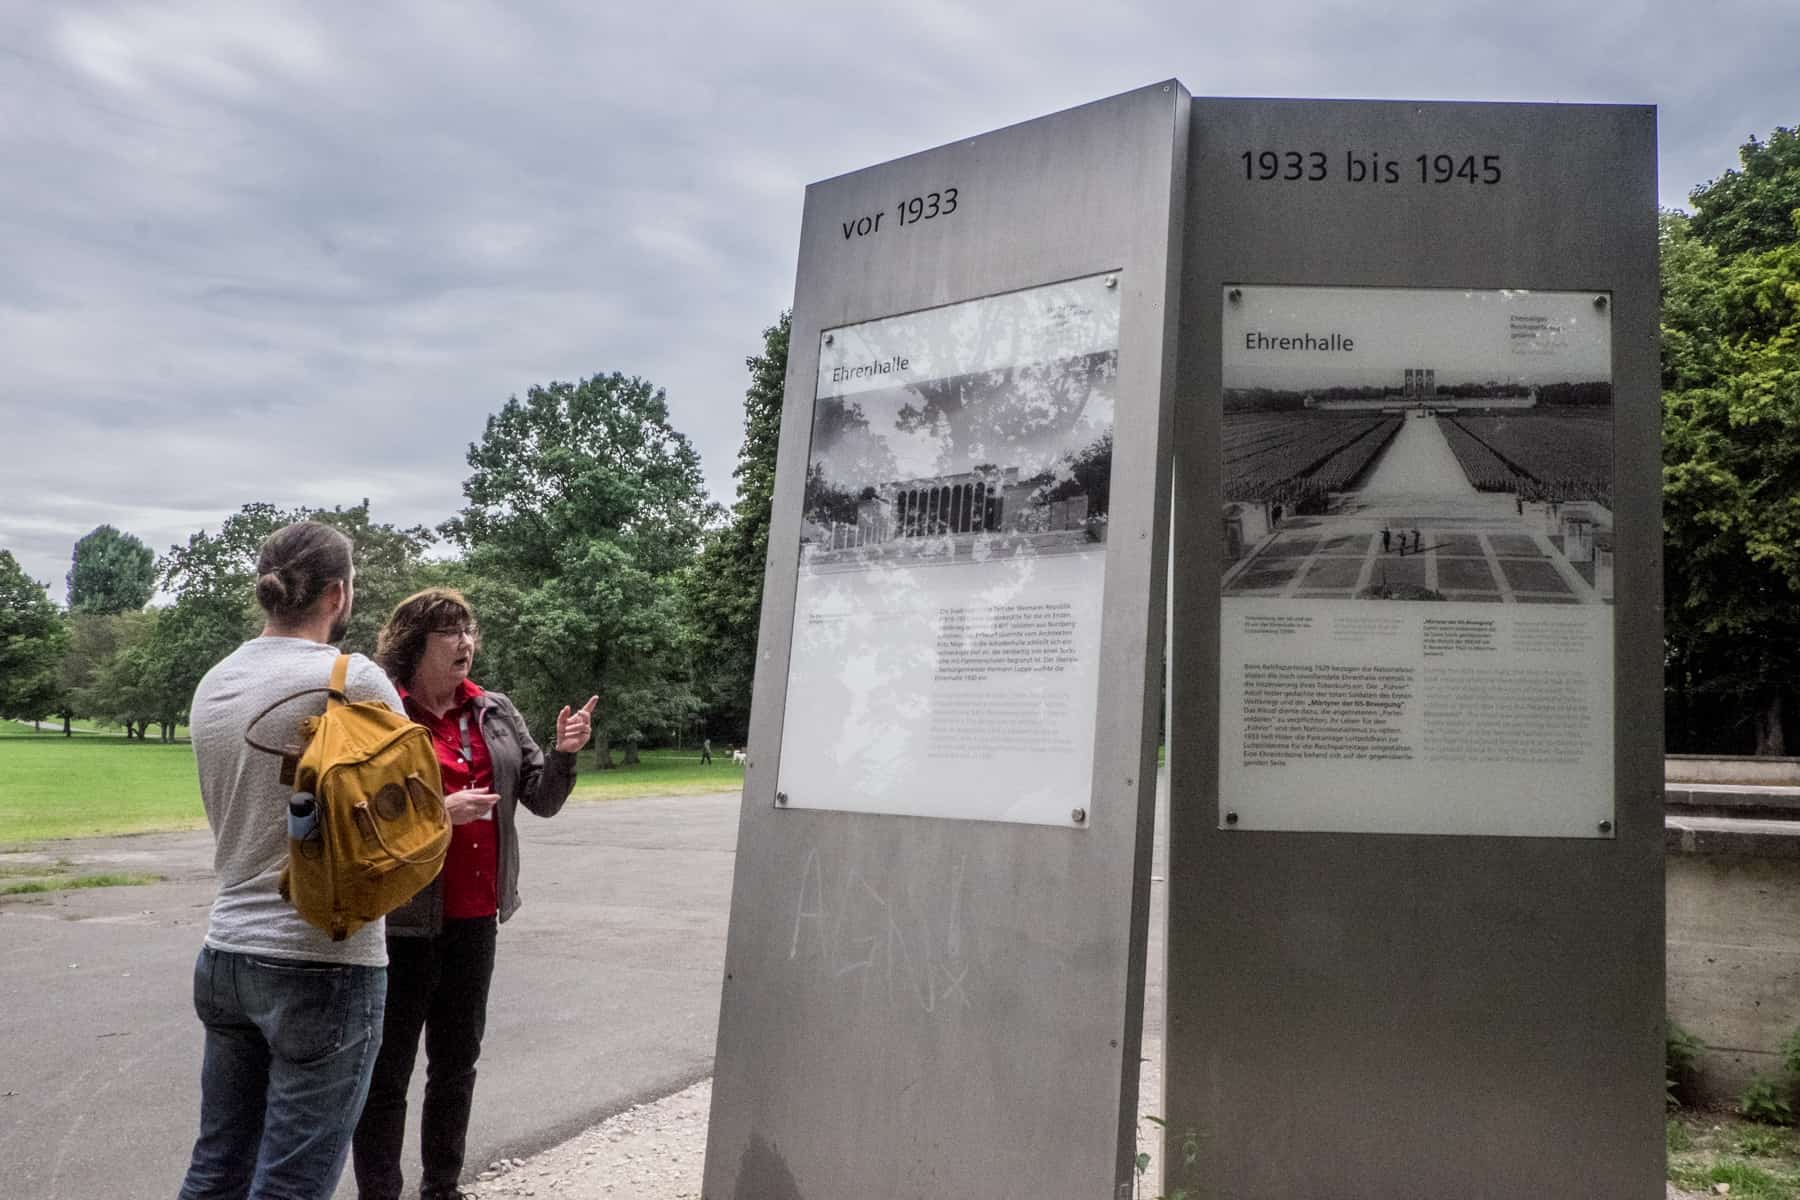 A male traveller with a yellow backback listens to a female guide at two information boards located at one of the former Nazi Party Rally Ground sites in Nuremberg, Germany